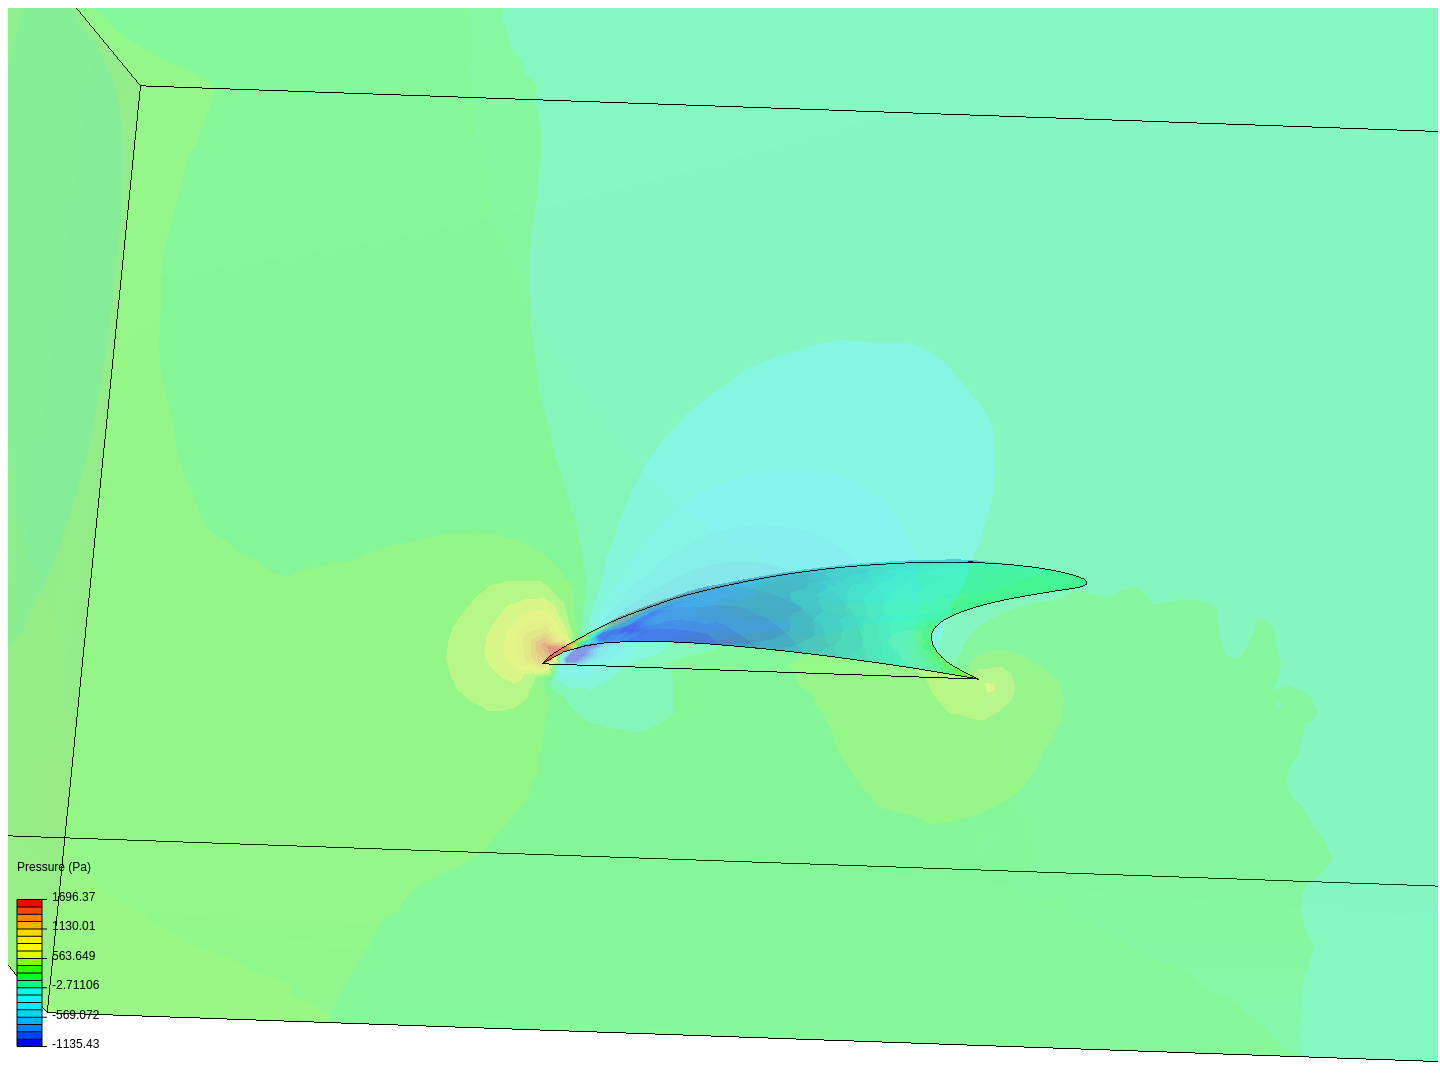 fin cfd image